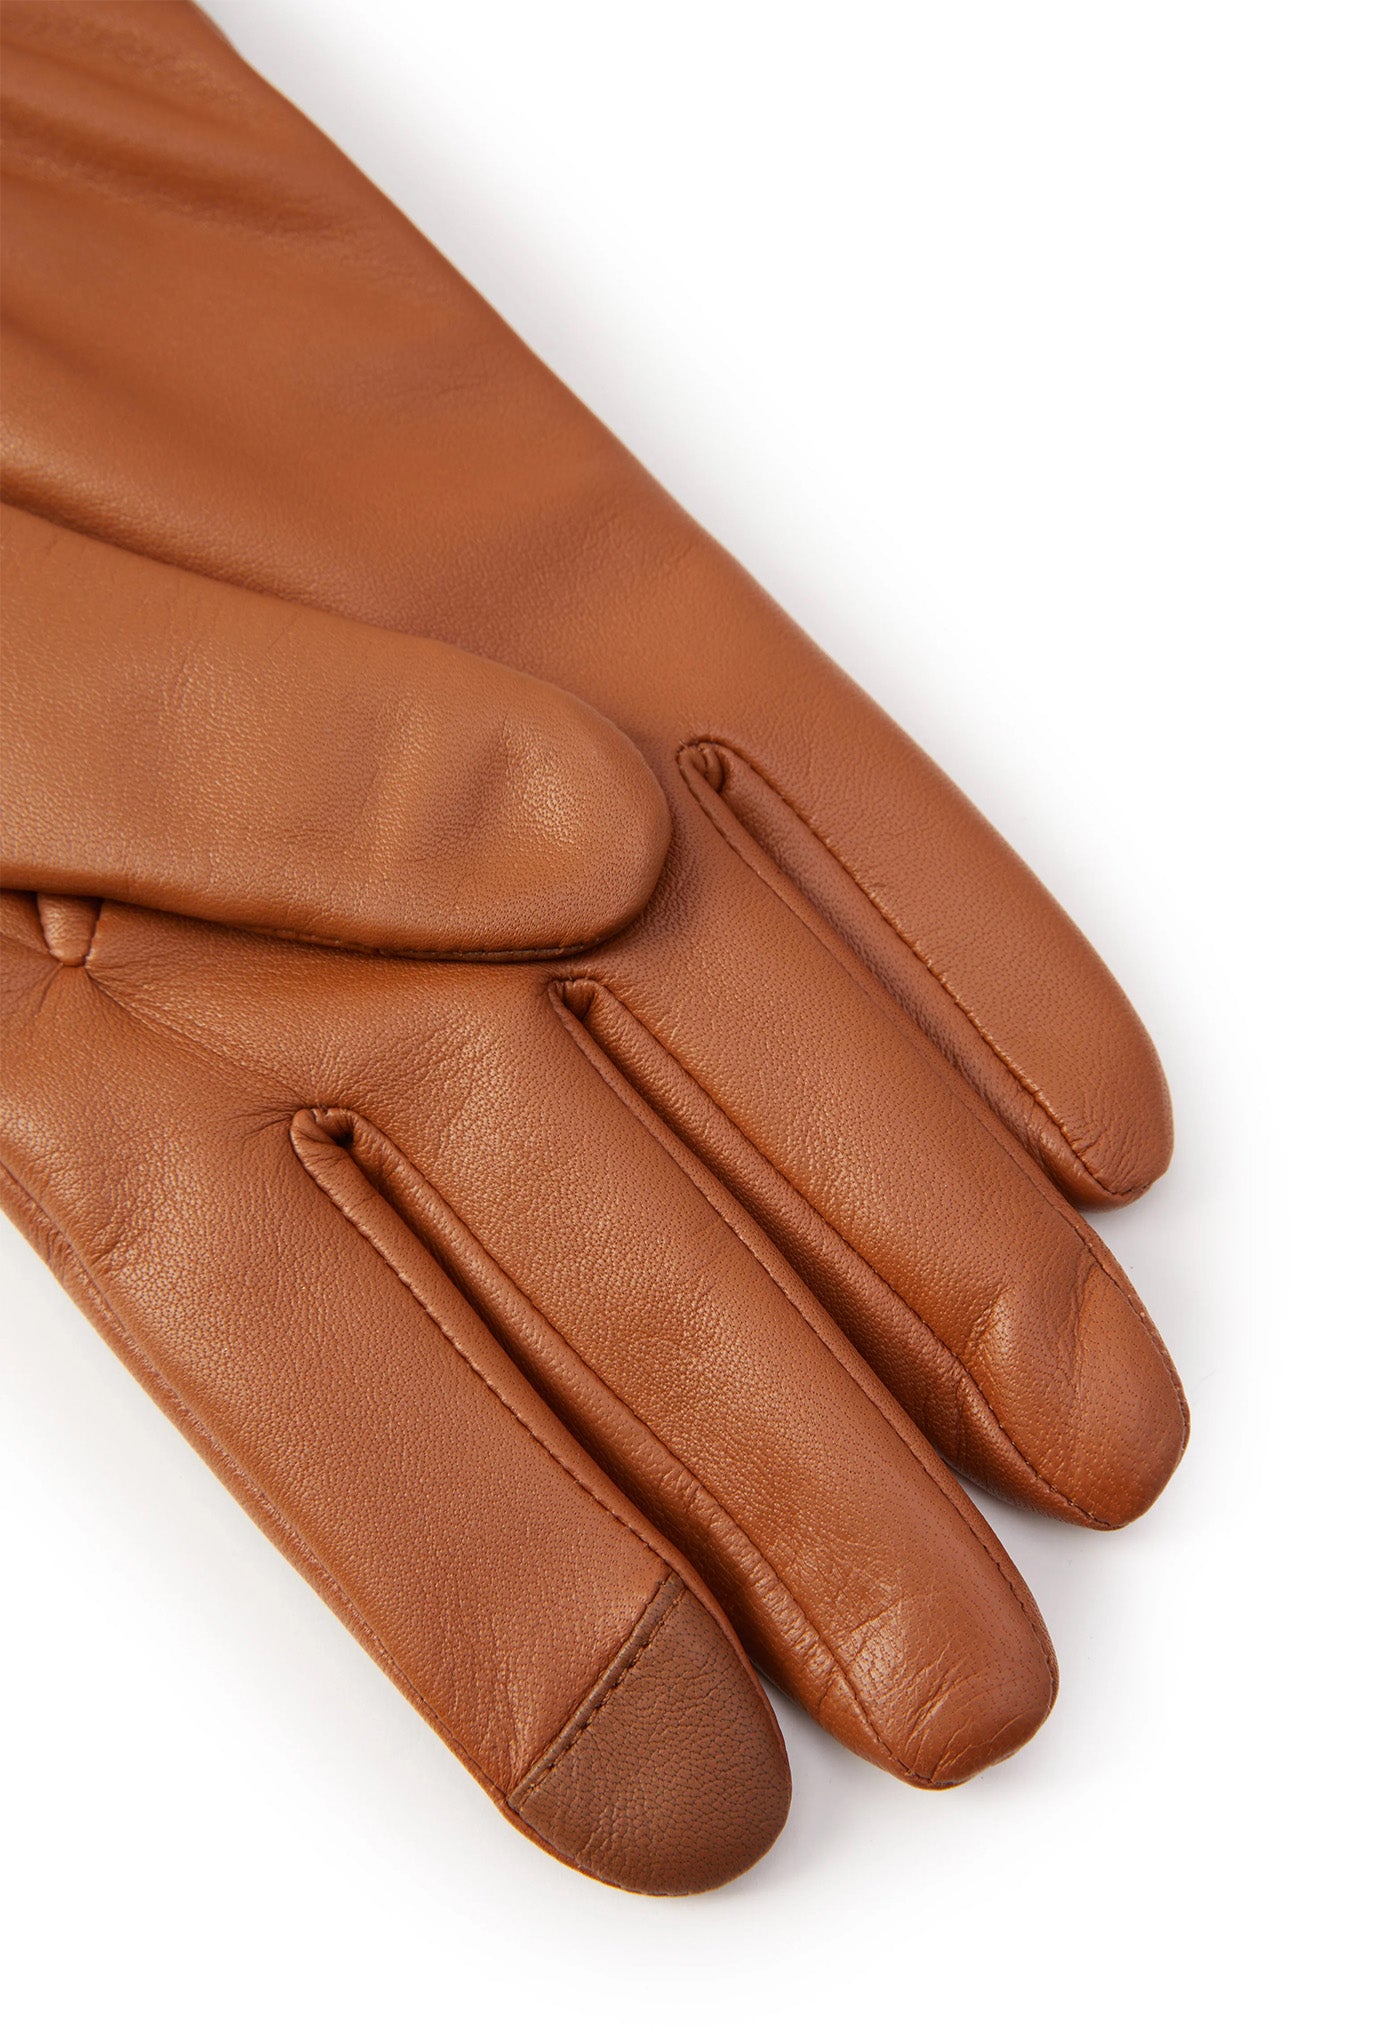 Contrast Leather Gloves - Tan Ink Navy sold by Angel Divine